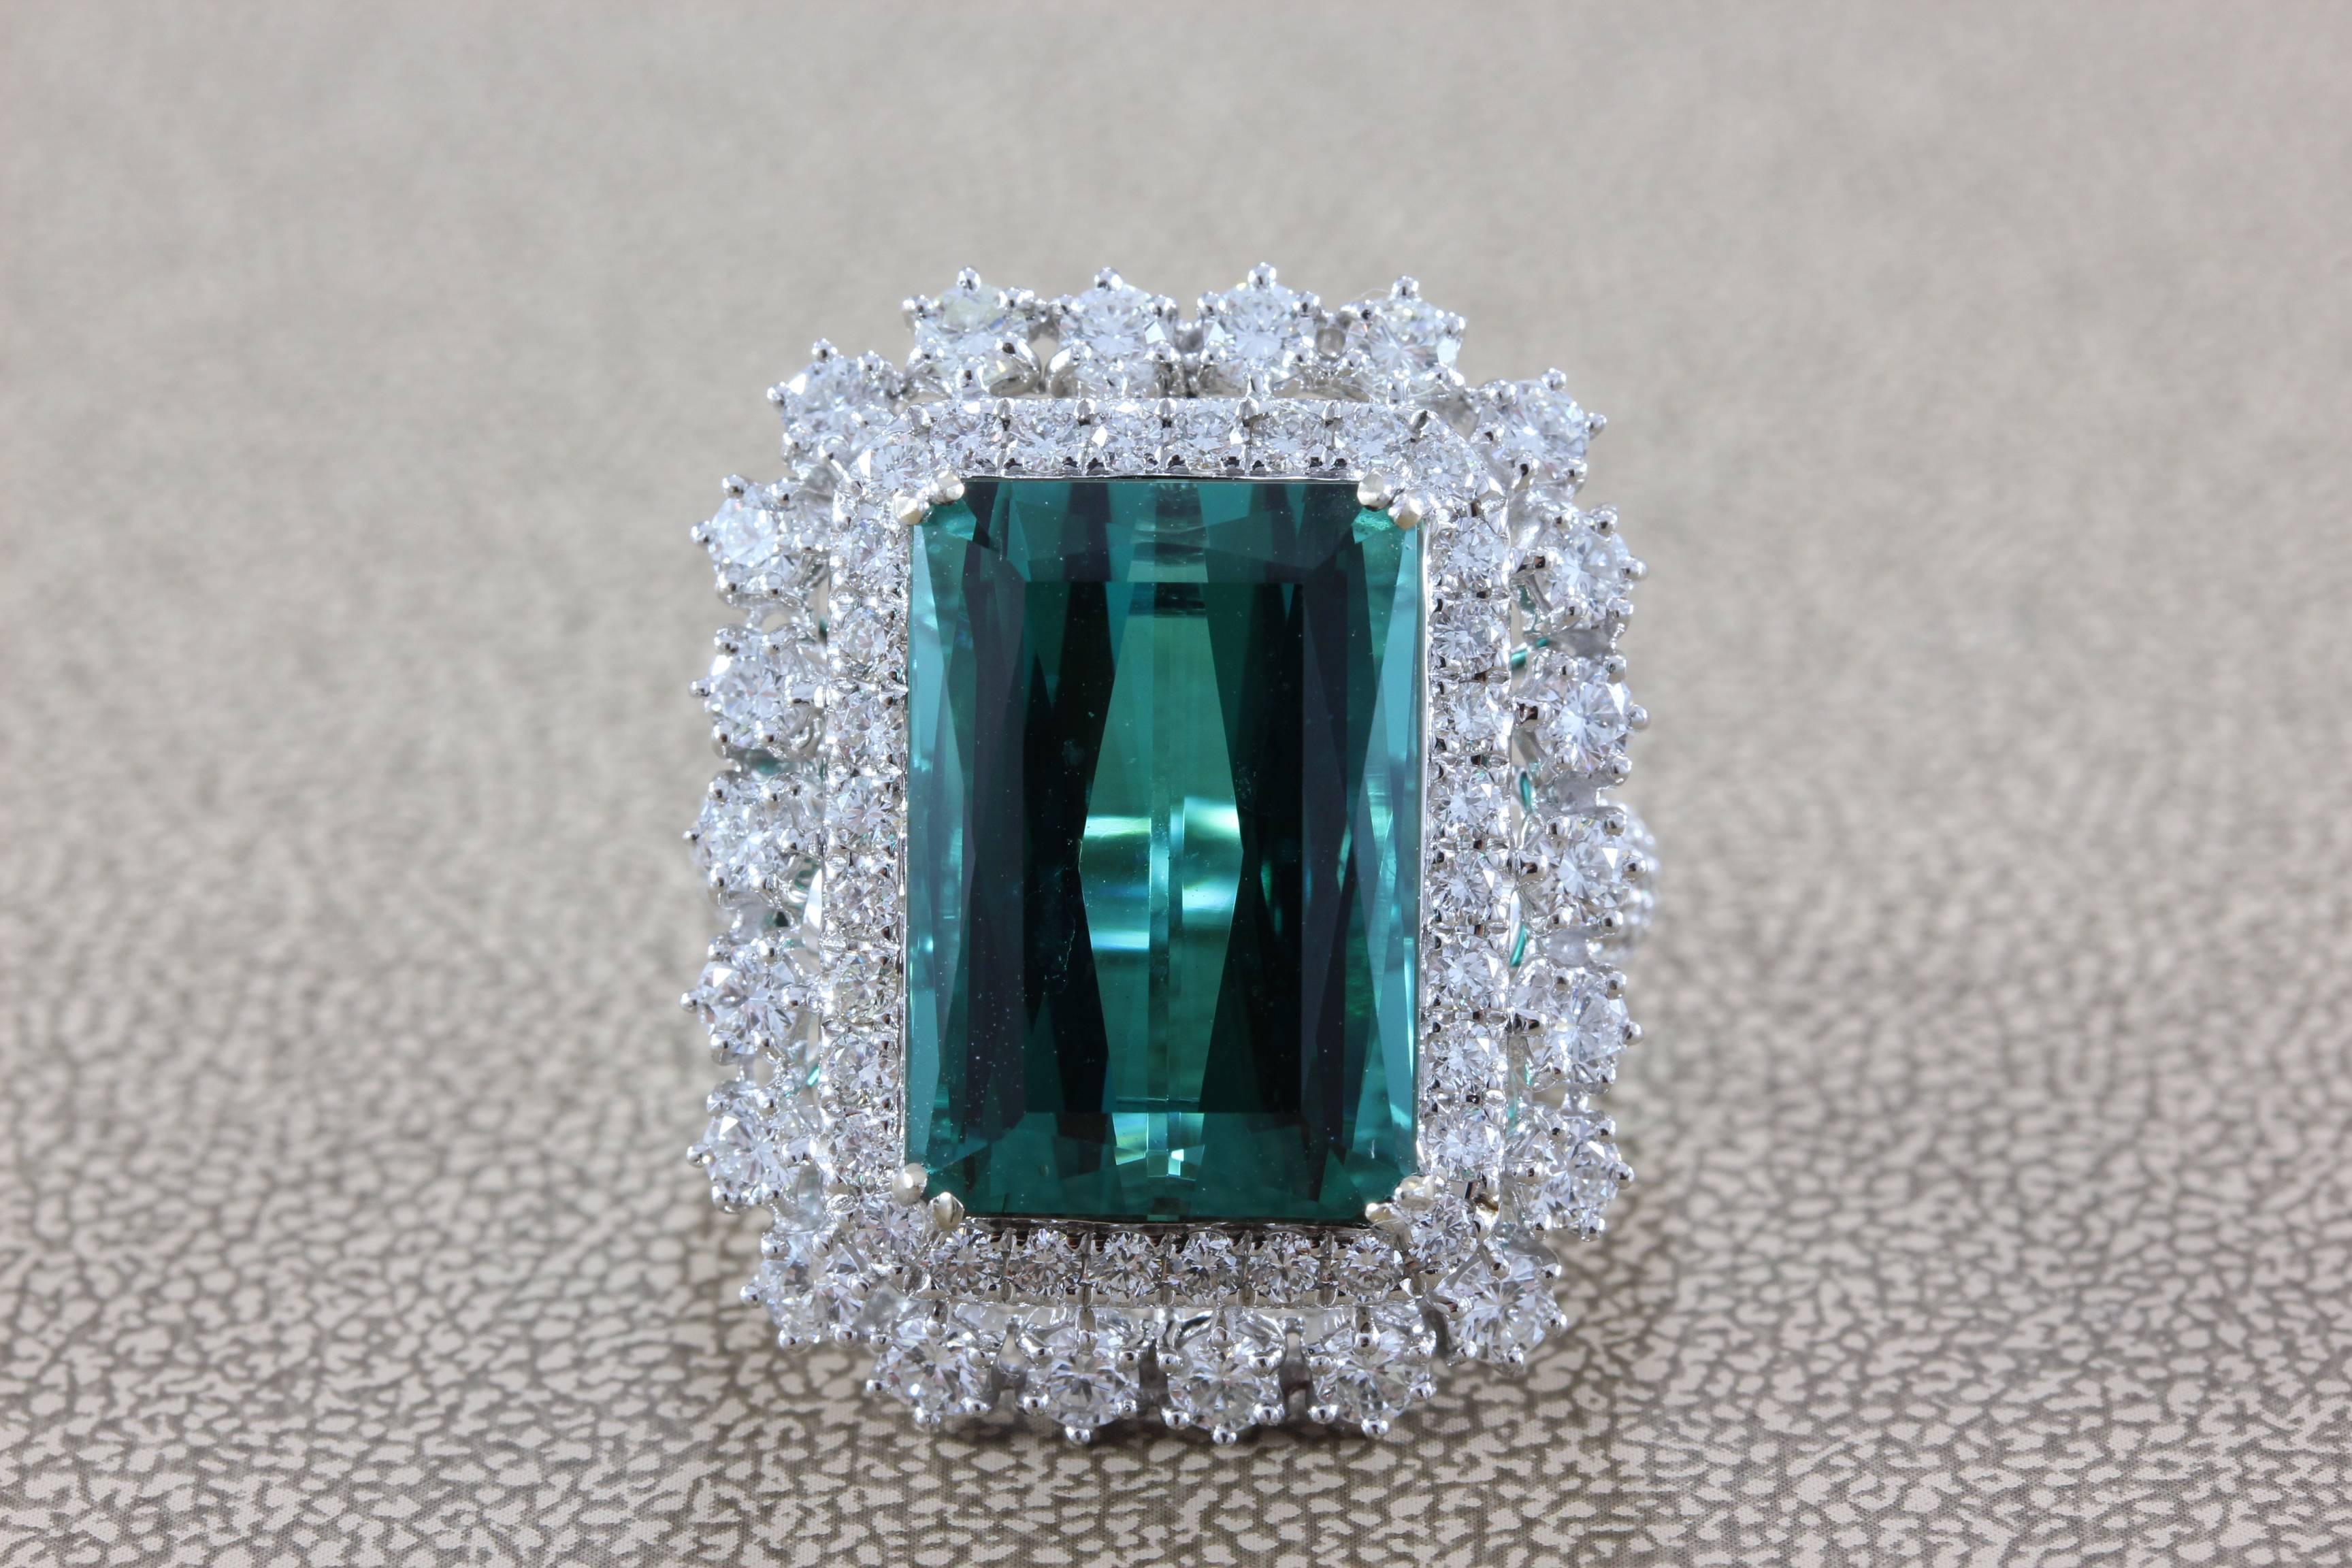 This royal ring features a 12.90 carat fancy cut Green Blue tourmaline which has been tested and certified by the GIA laboratory. The tourmaline features an even richly saturated color tone found in top gem quality tourmaline. A double halo of round